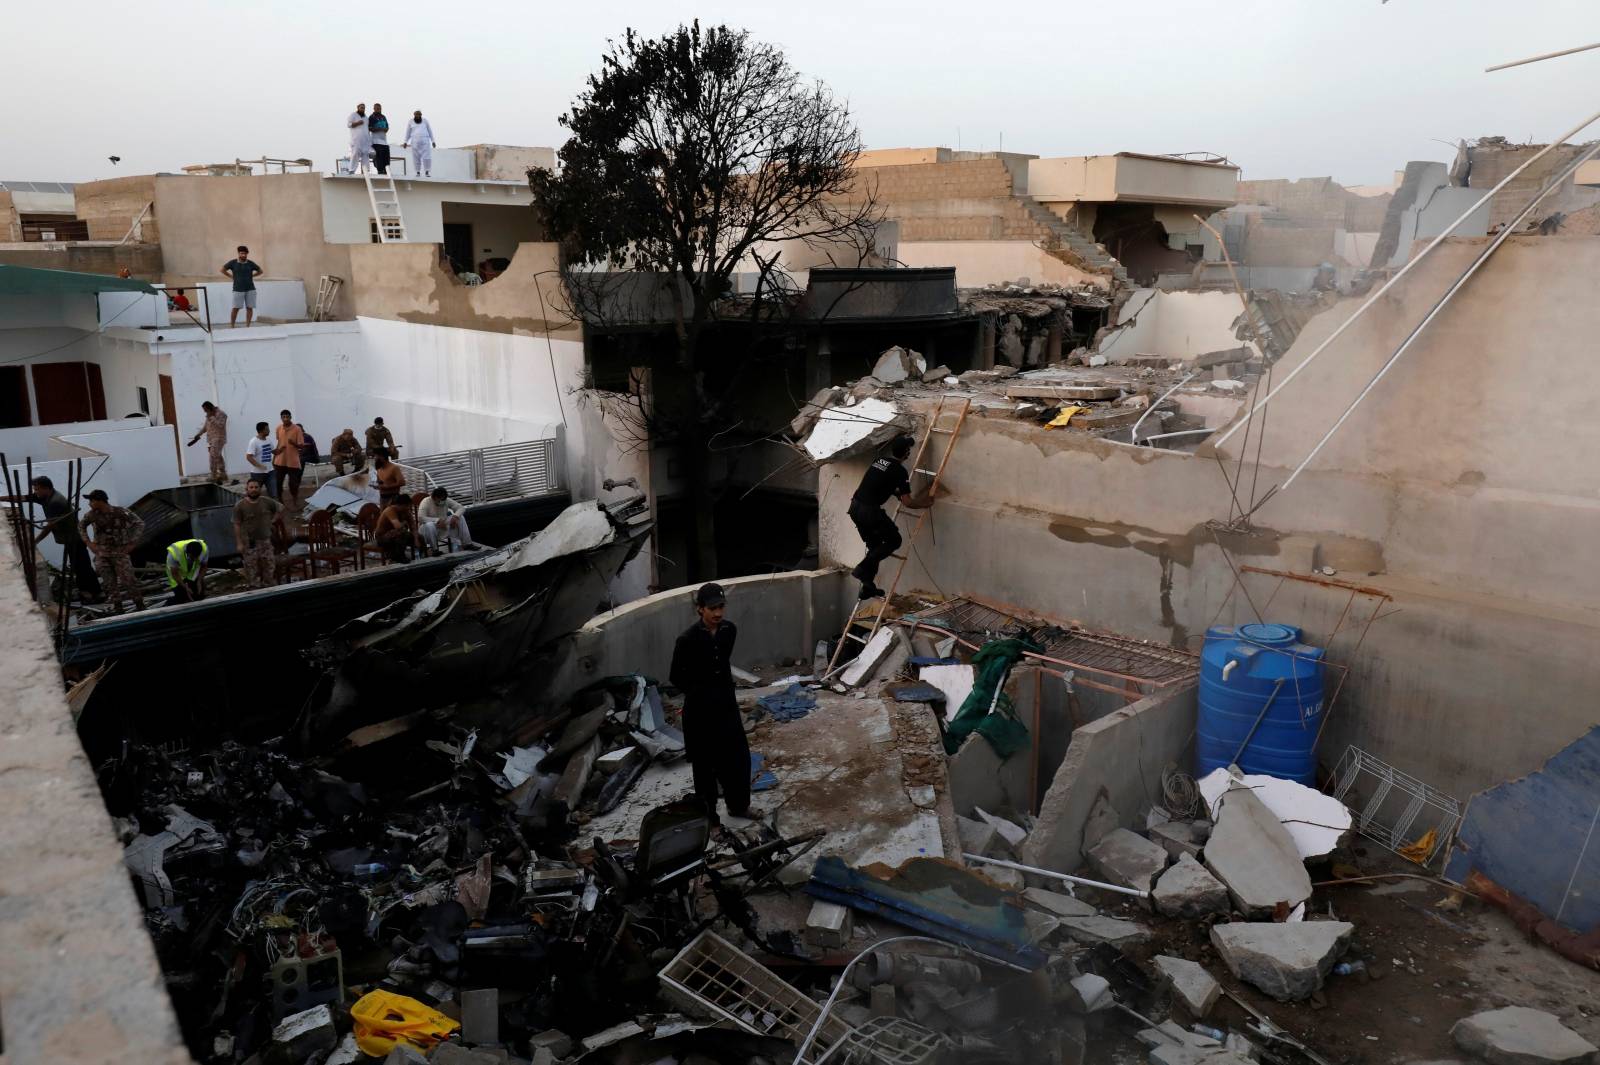 People stand on a roof of a house amidst debris of a passenger plane, crashed in a residential area near an airport in Karachi